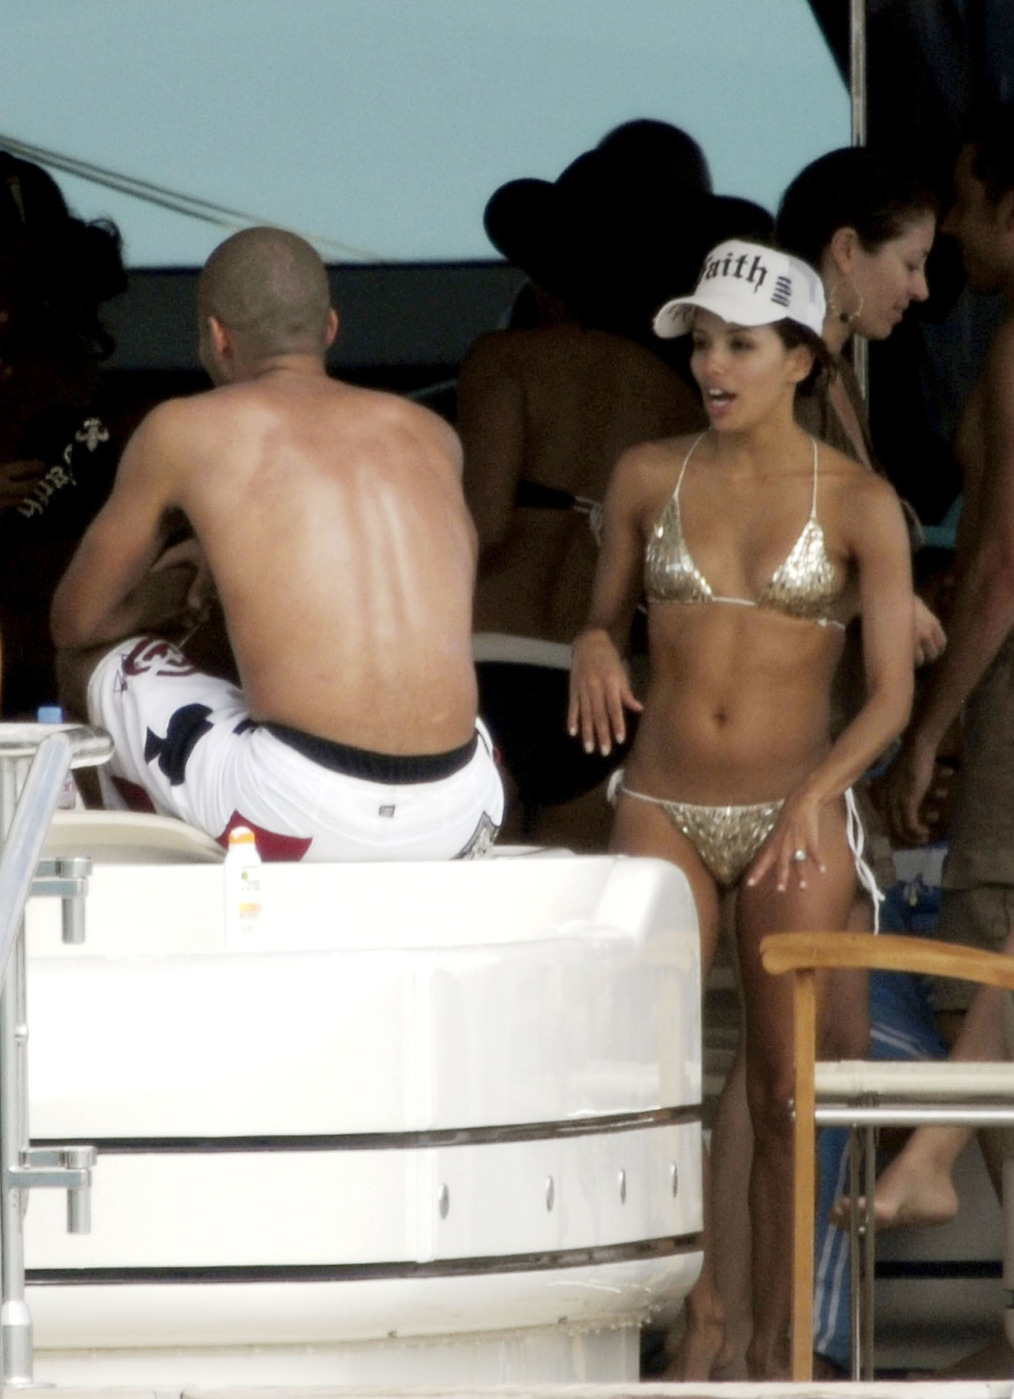 On the deck of a yacht this week Eva Longoria Parker appears to have lost